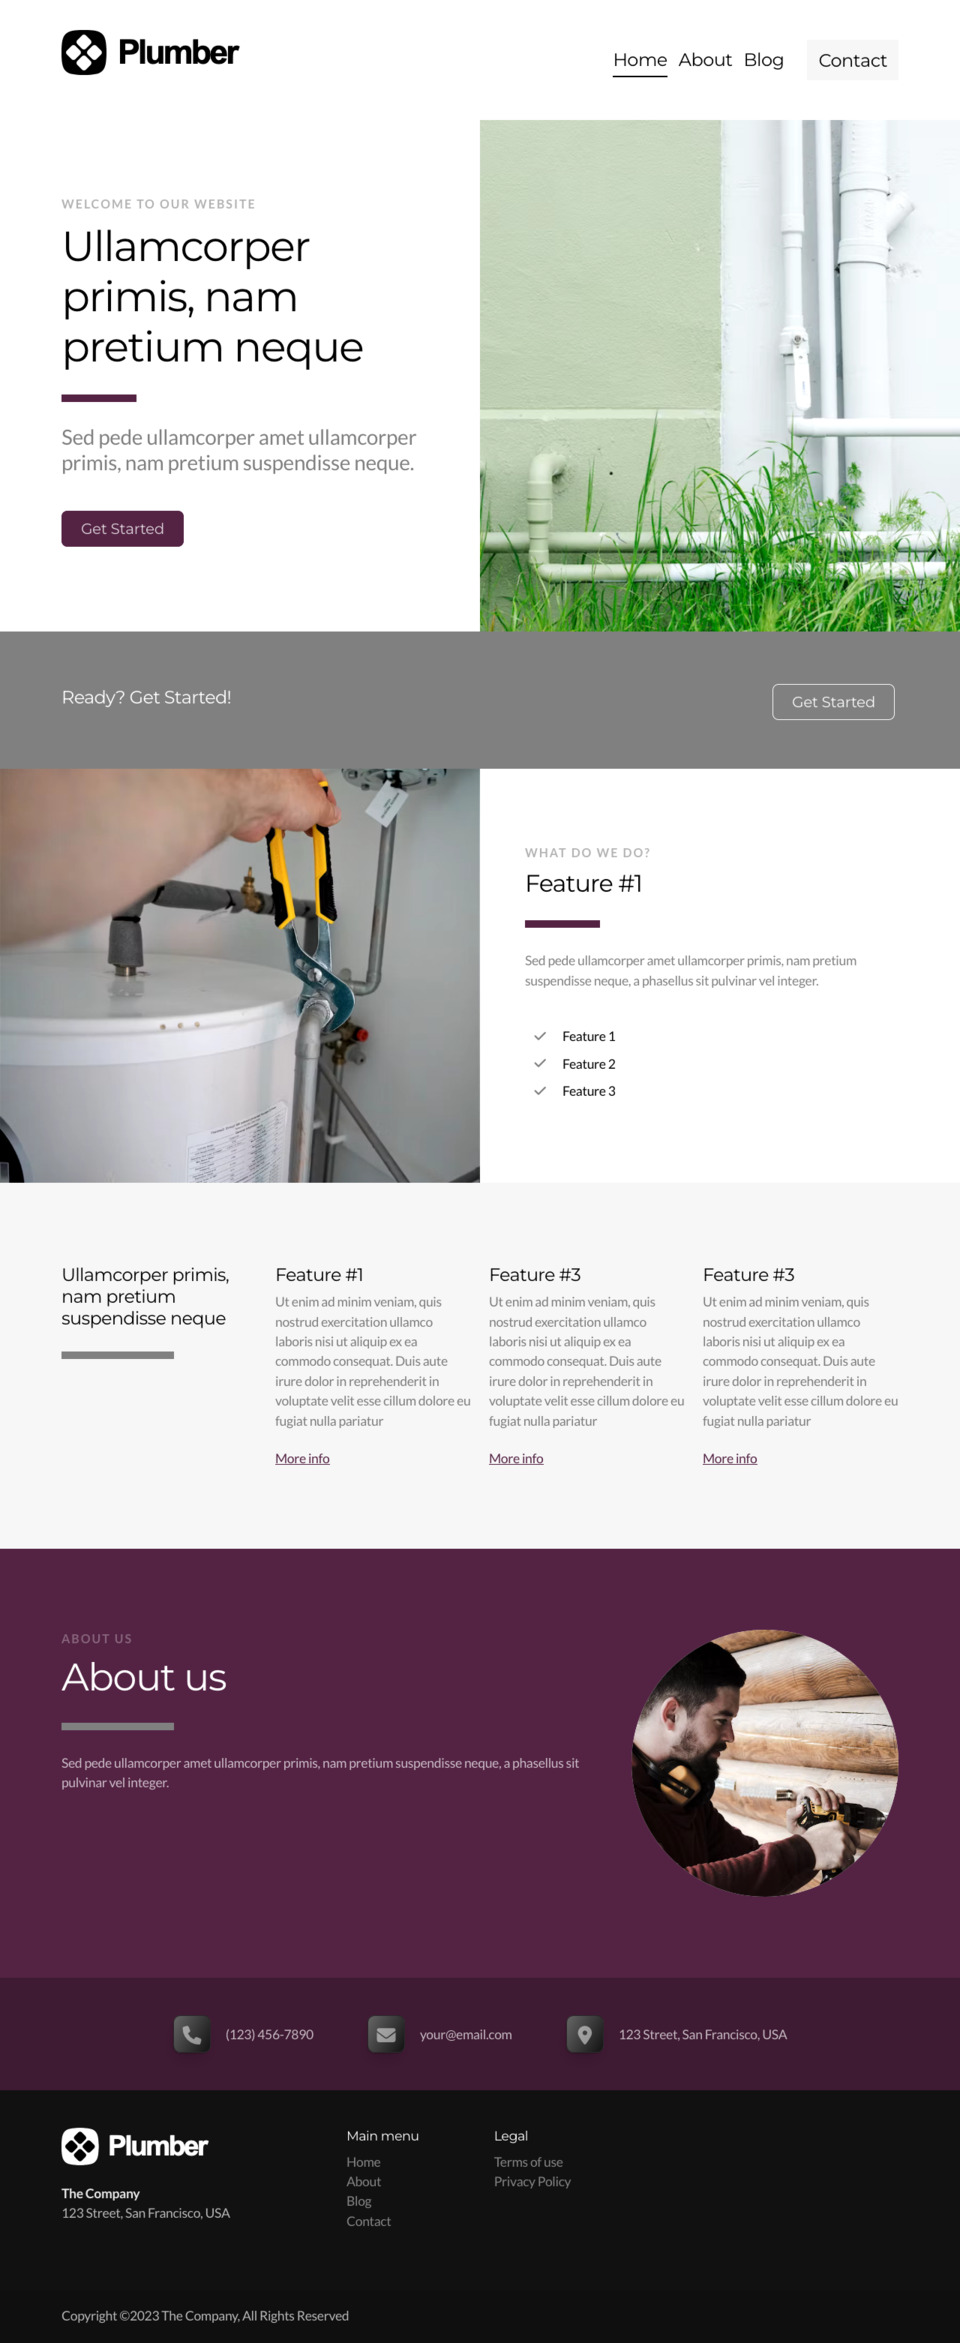 Plumber Website Template - Ideal for plumbers, plumbing companies, handymen, and businesses offering plumbing services.